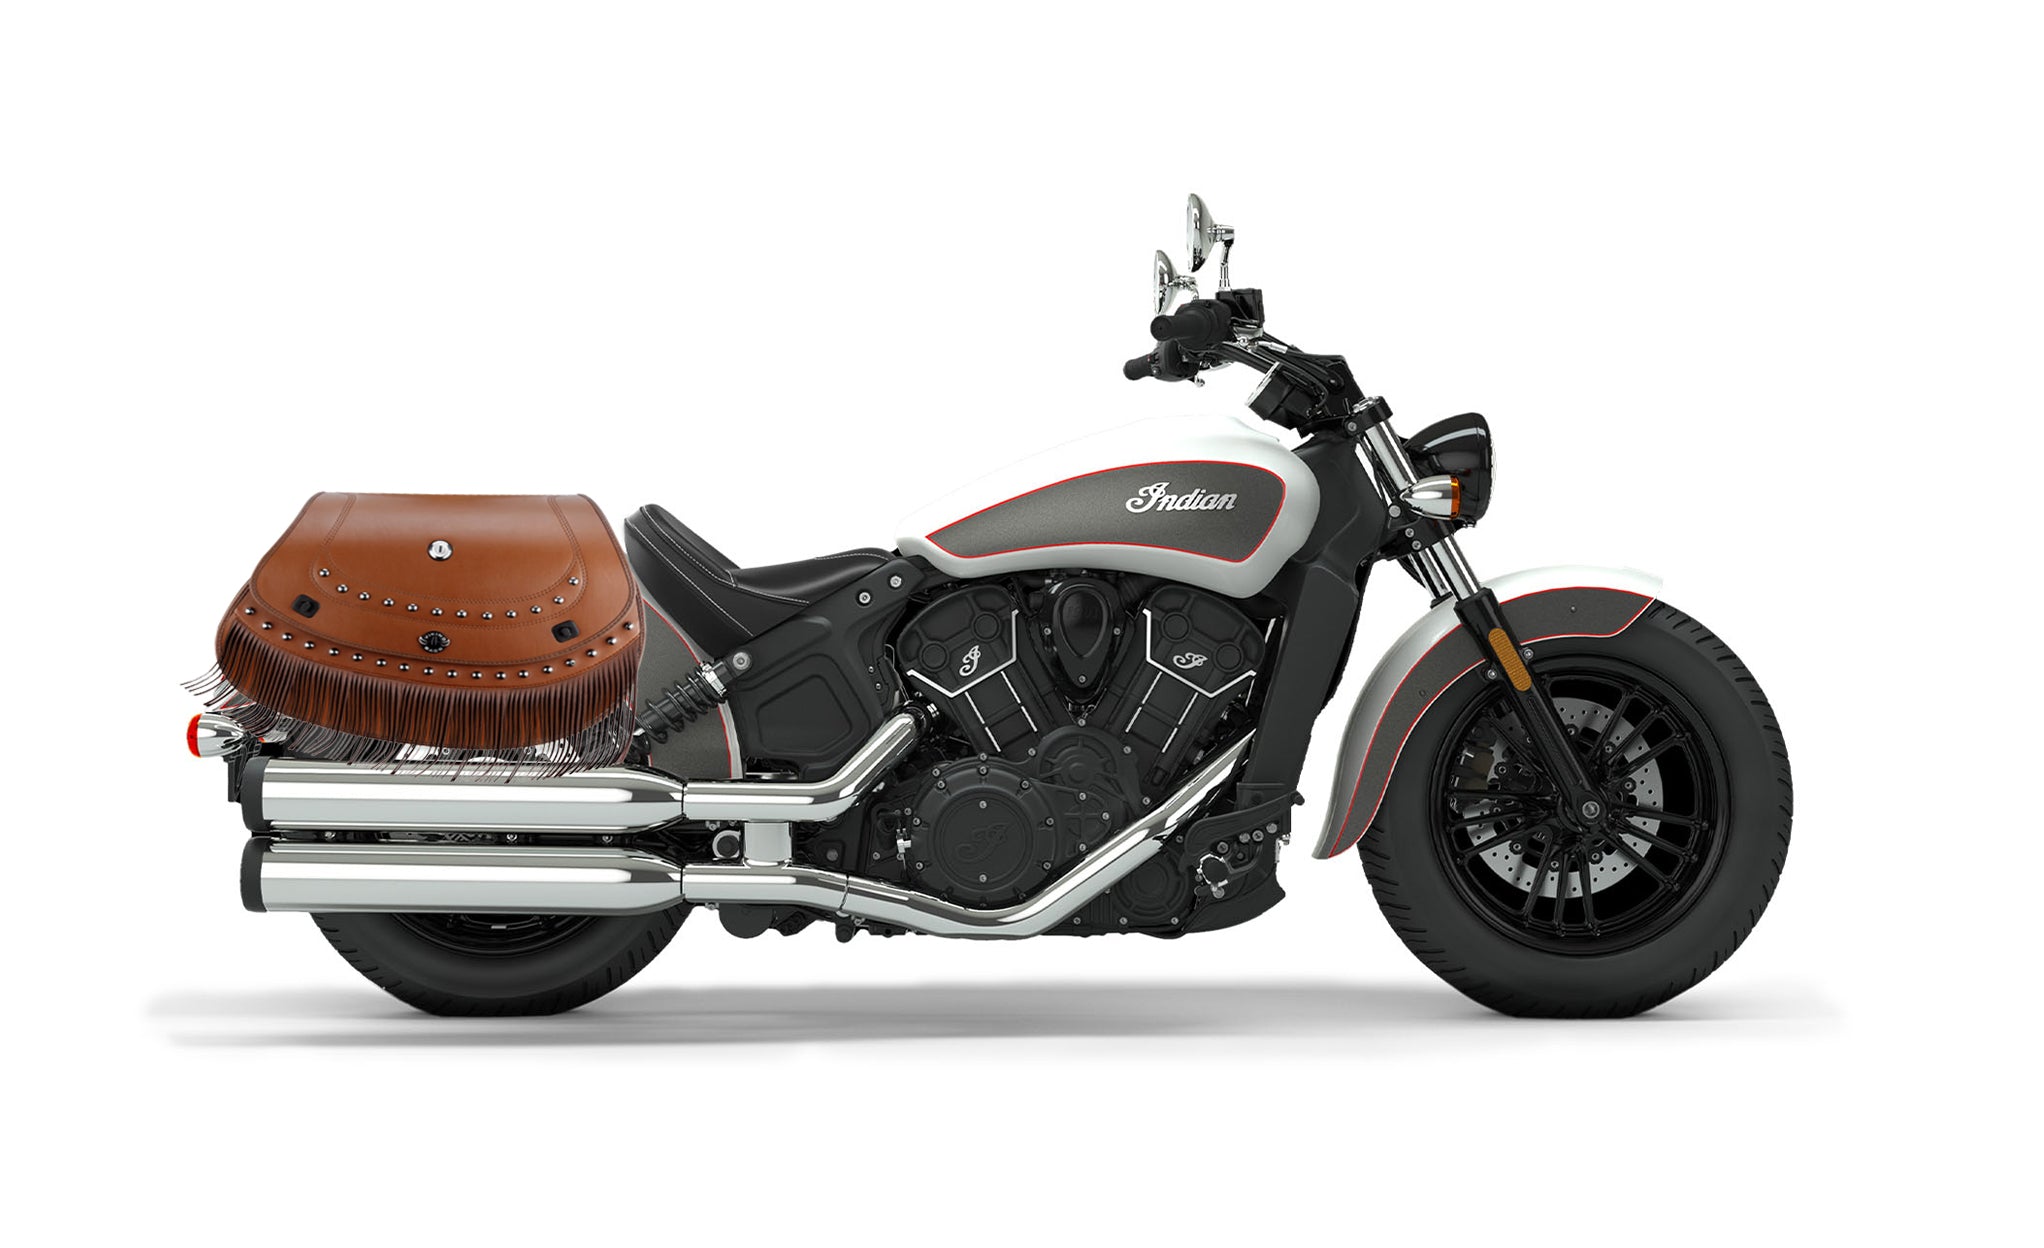 Viking Mohawk Brown Extra Large Indian Scout Sixty Specific Leather Motorcycle Saddlebags on Bike Photo @expand